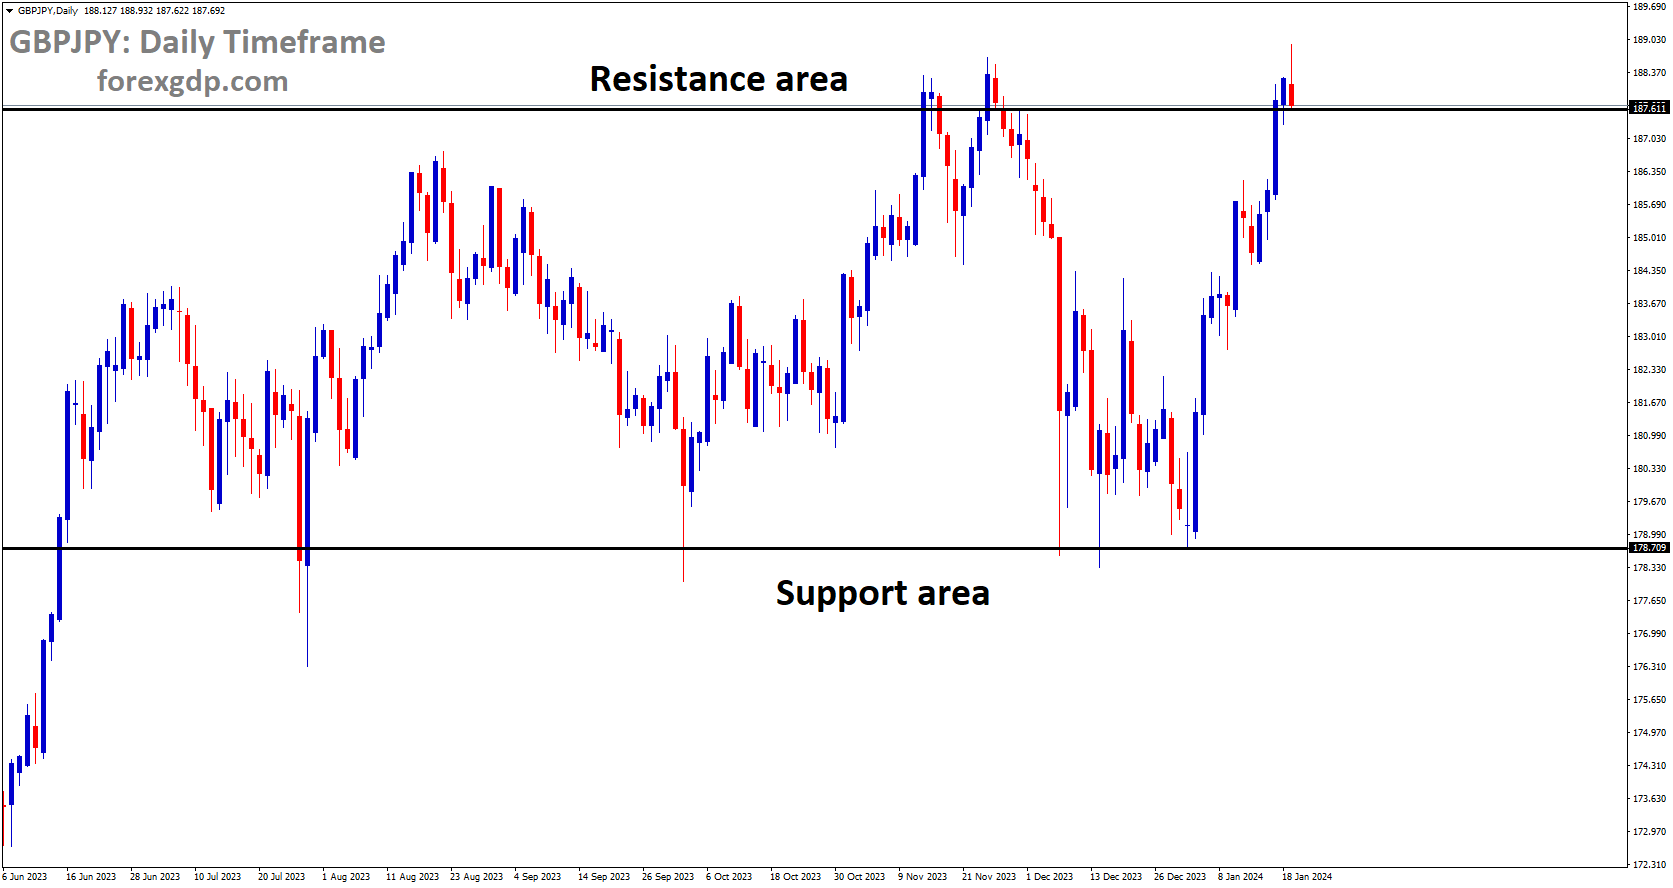 GBPJPY is moving in box pattern and market has reached resistance area of the pattern